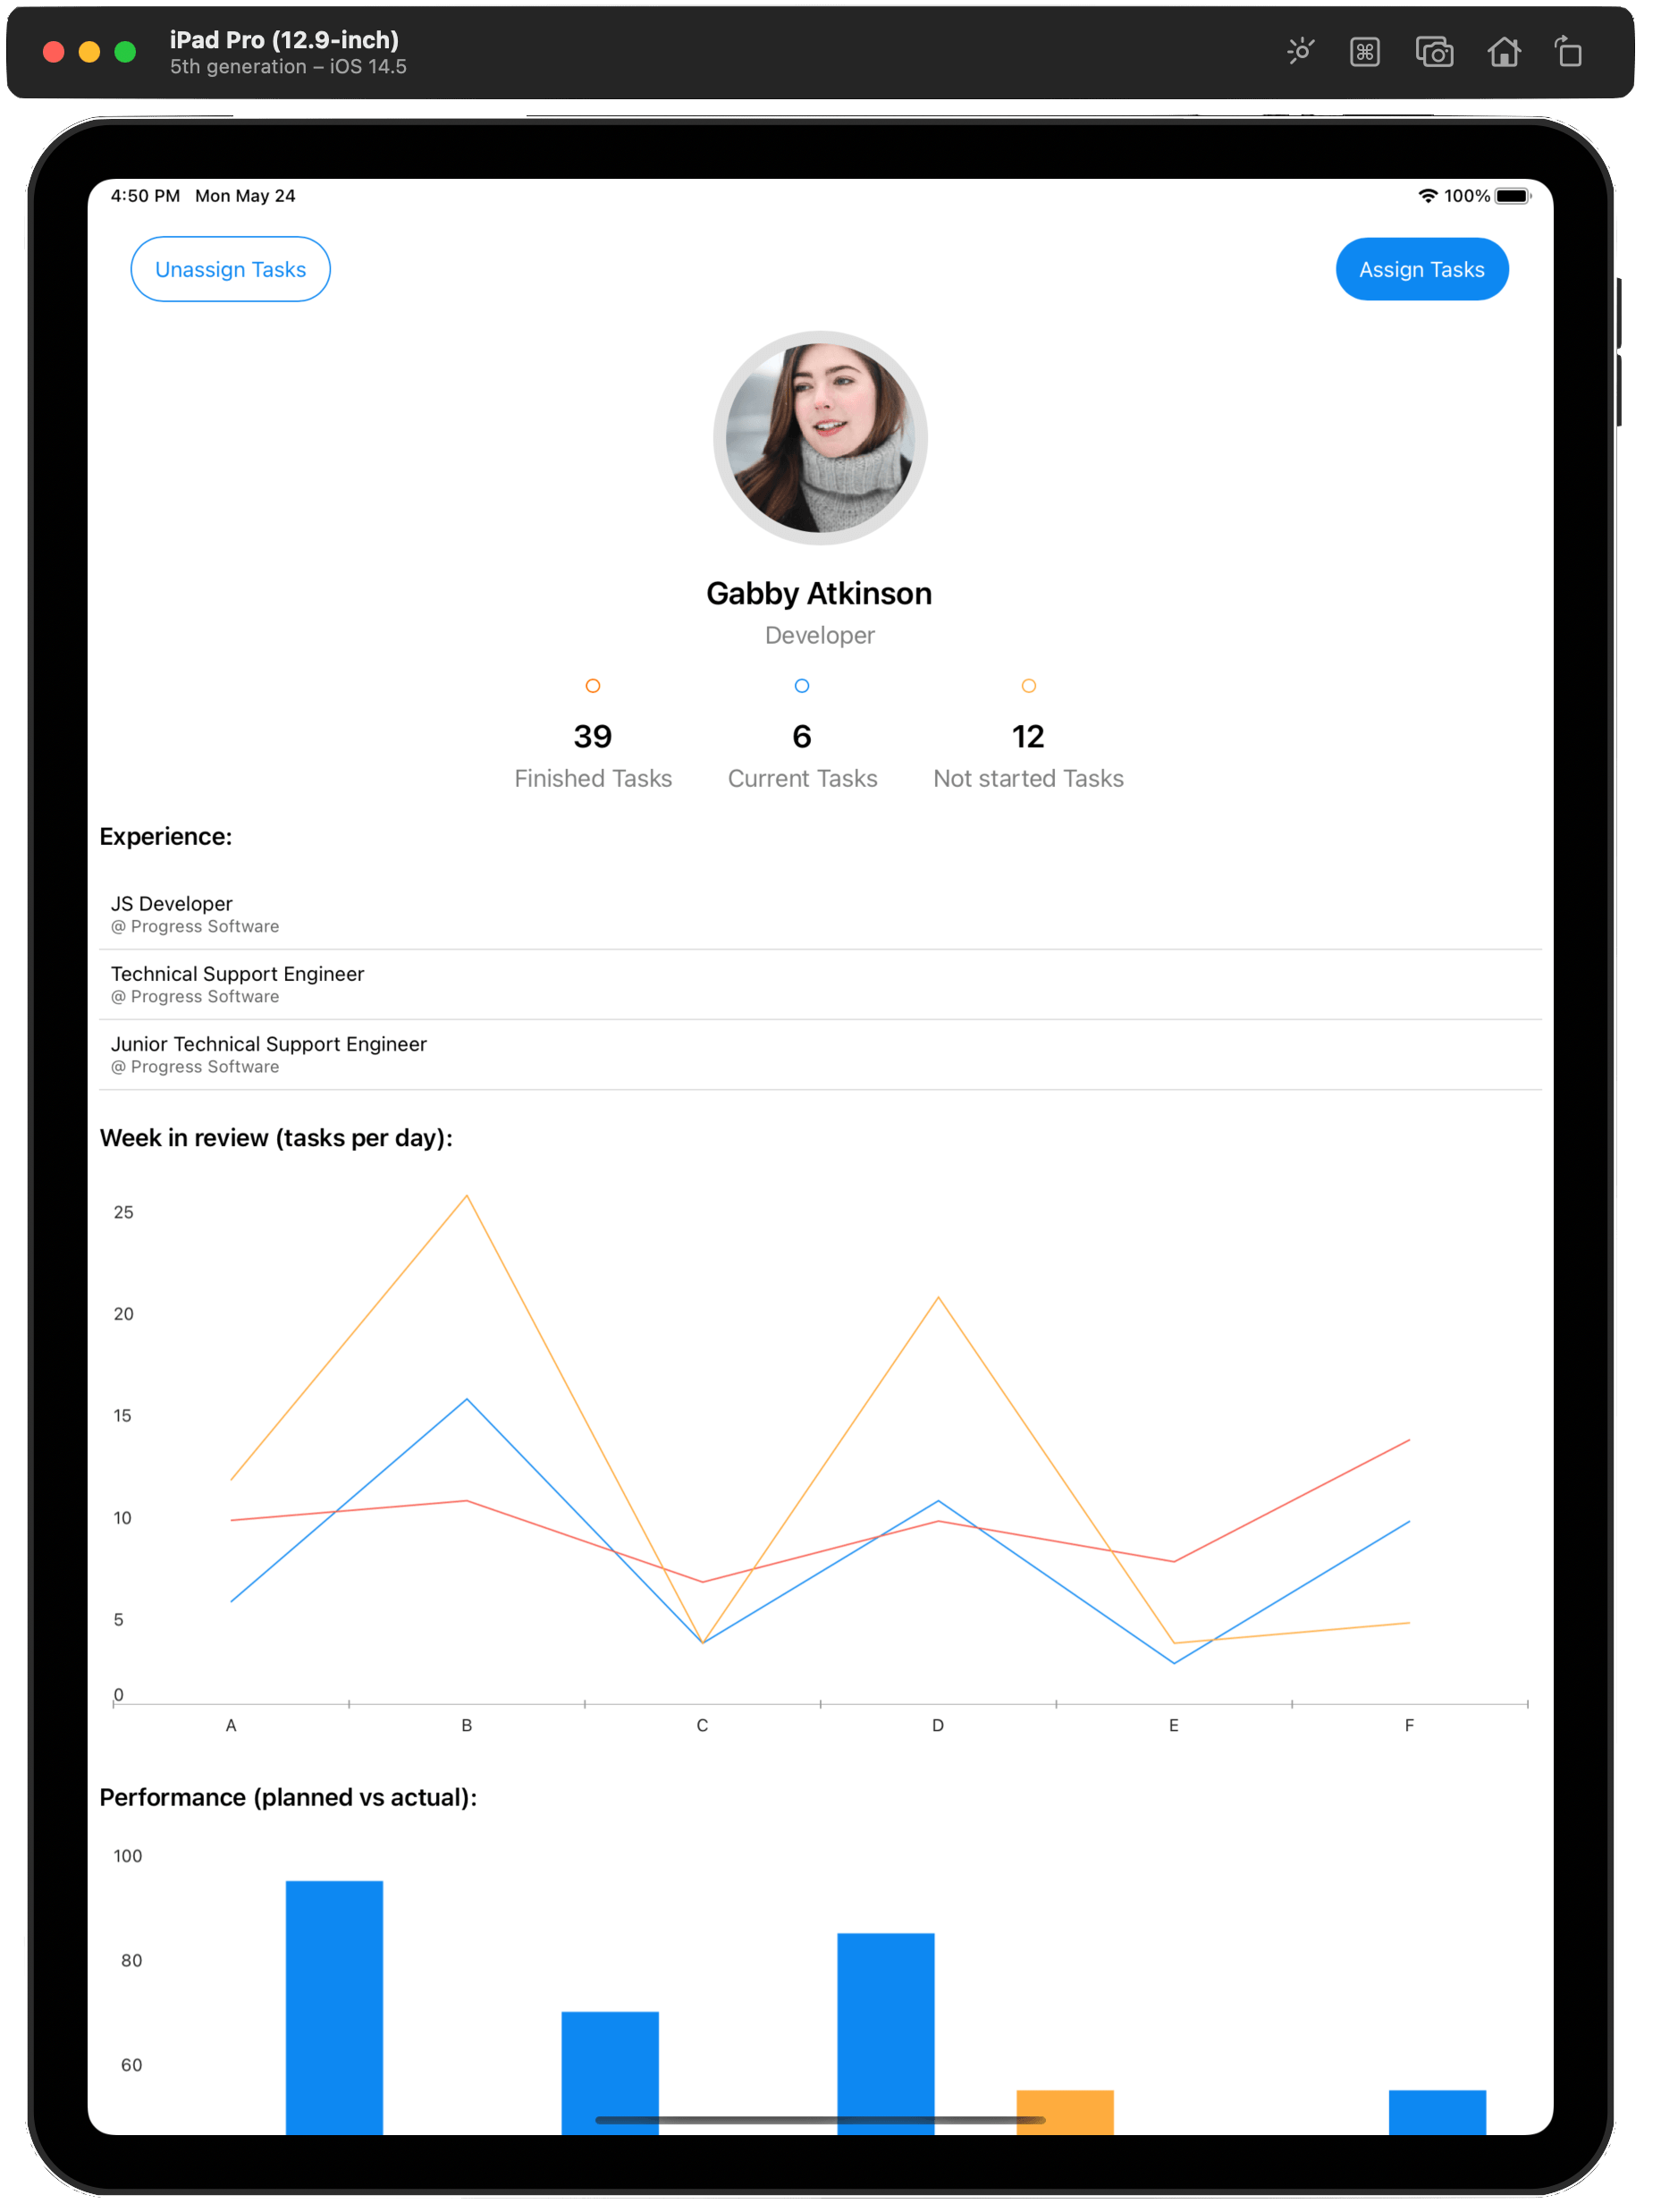 TelerikMauiOniPad - An app with a person’s profile; buttons to assign and unassign tasks; numbers of finished, current and not started tasks; experience; week in review line graph; performance bar chart.